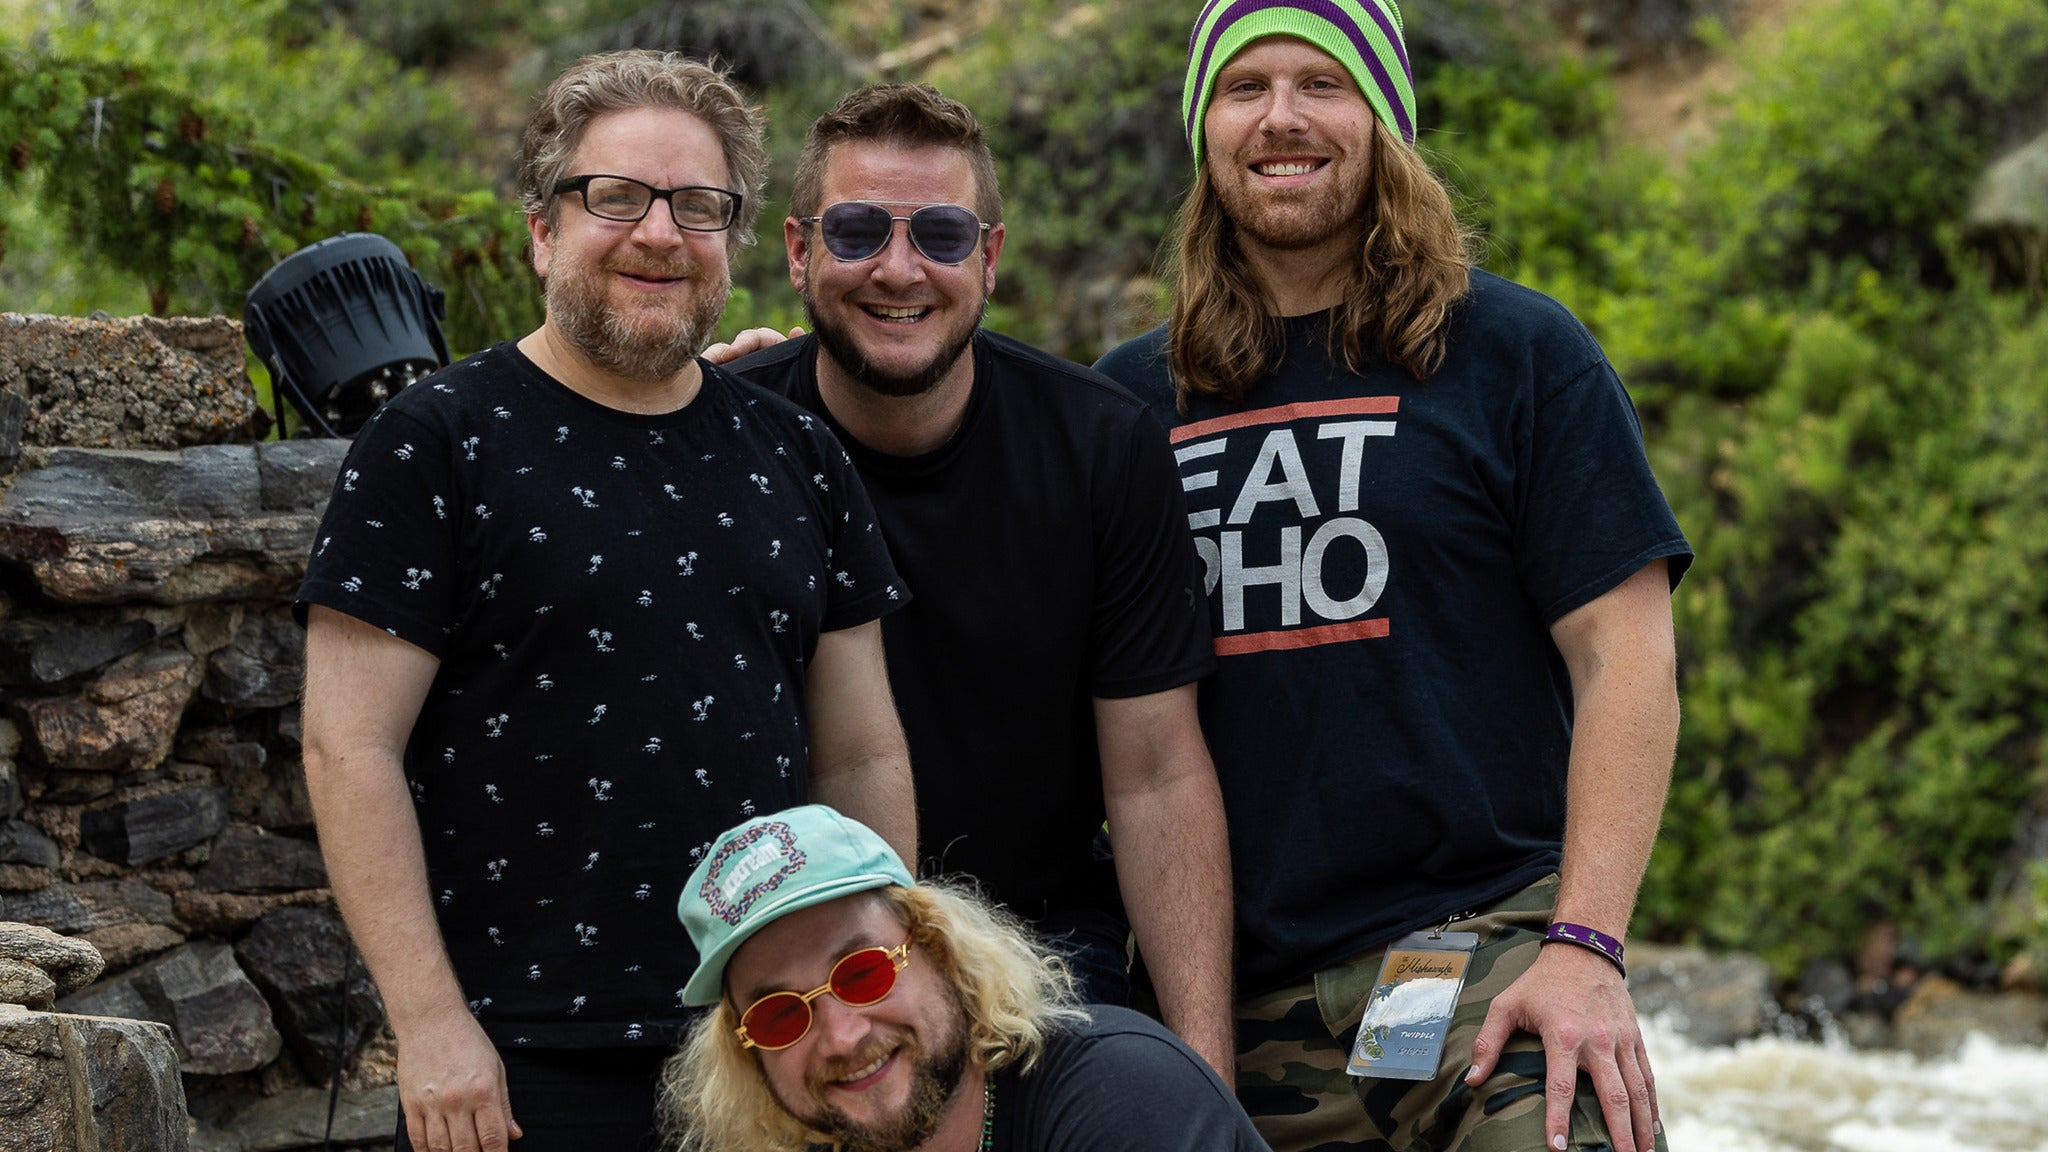 Twiddle pre-sale passcode for performance tickets in Washington, DC (9:30 CLUB)